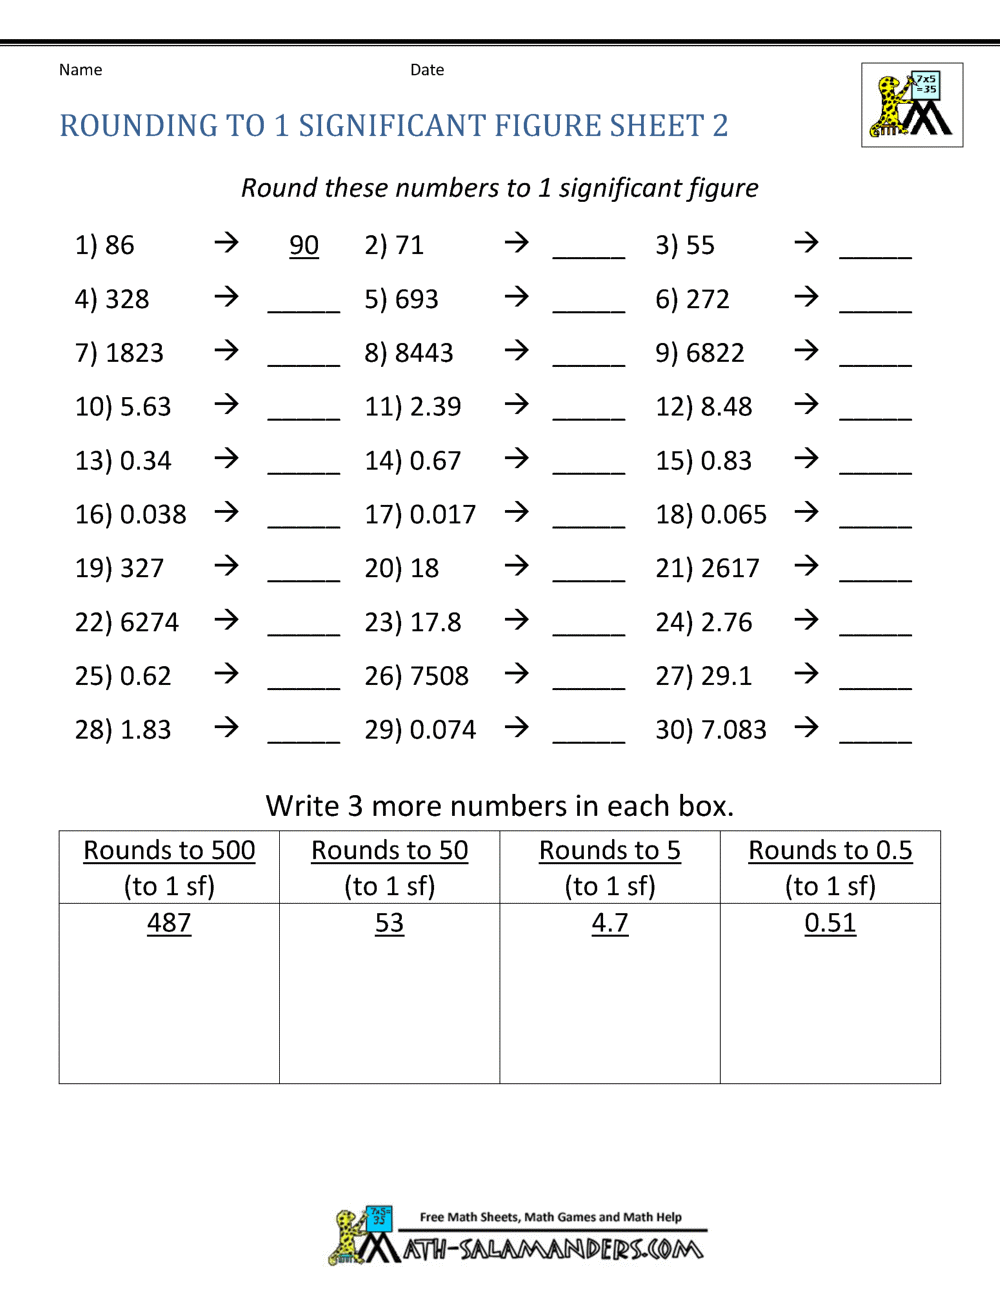 Rounding Significant Figures Regarding Significant Figures Worksheet Chemistry